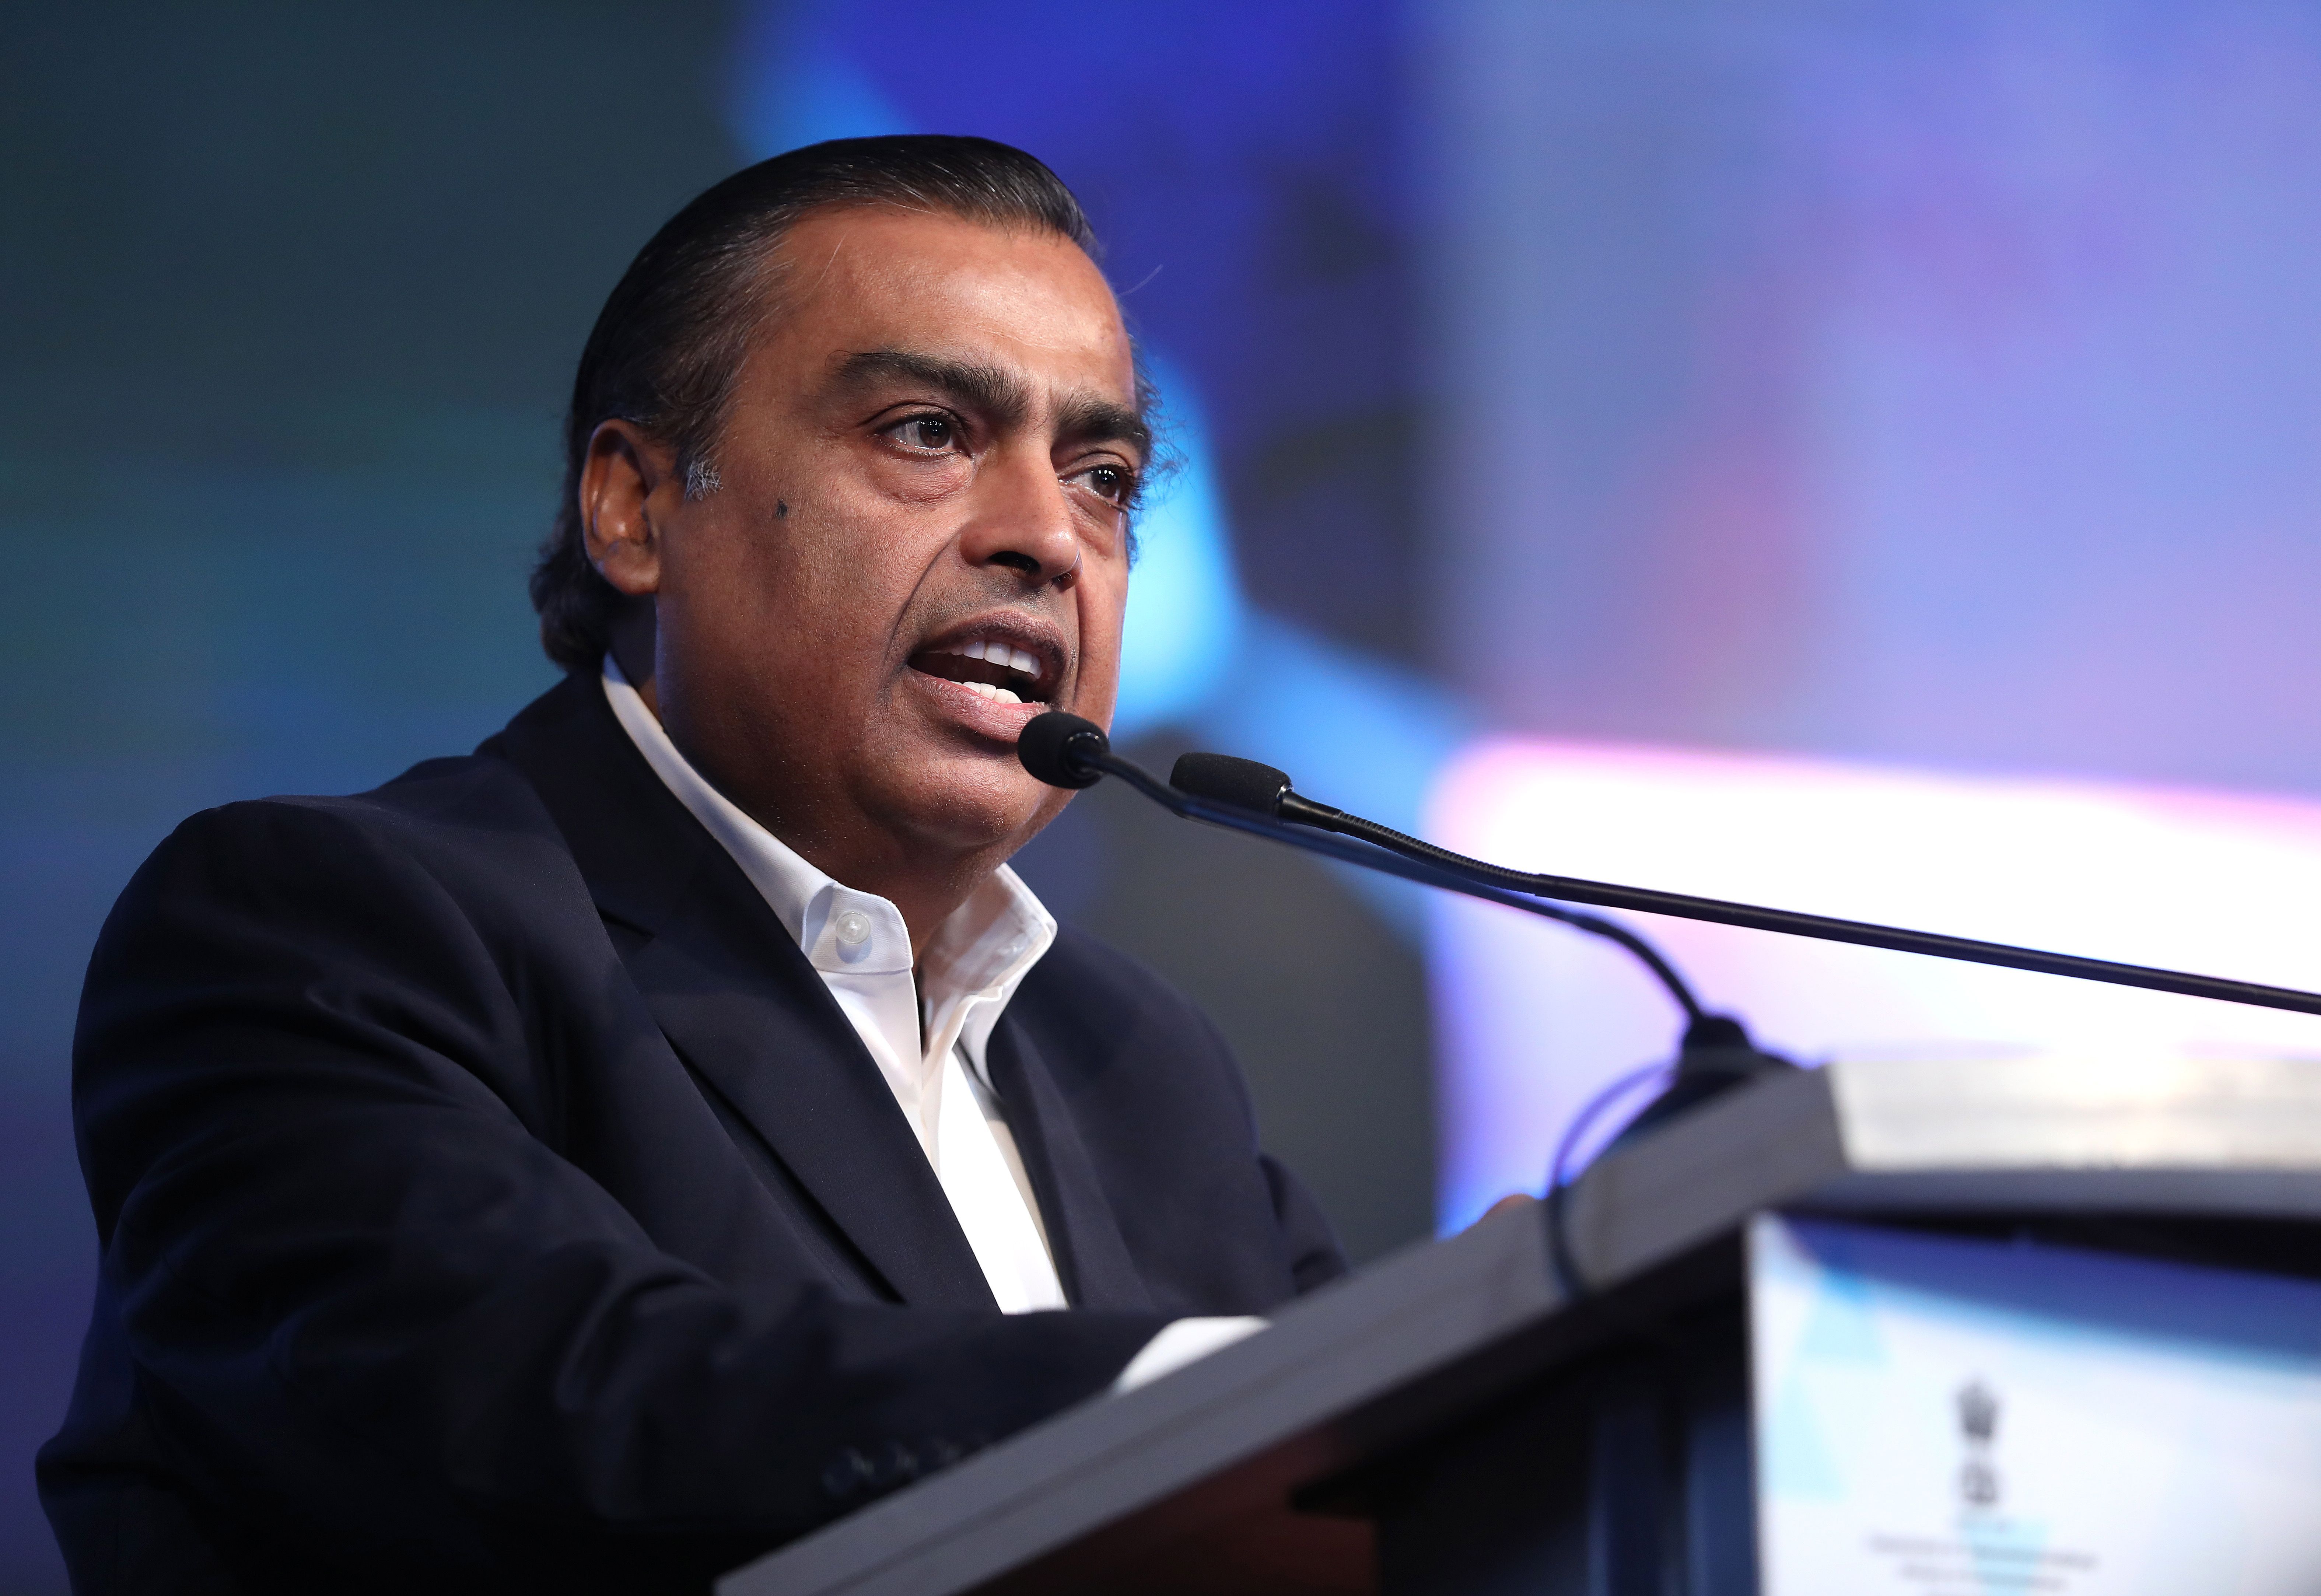 Meet Asia's New Richest Man, an Indian Mogul Who Lives in a 27-Story Home and Hired Beyoncé for His Daughter's Wedding